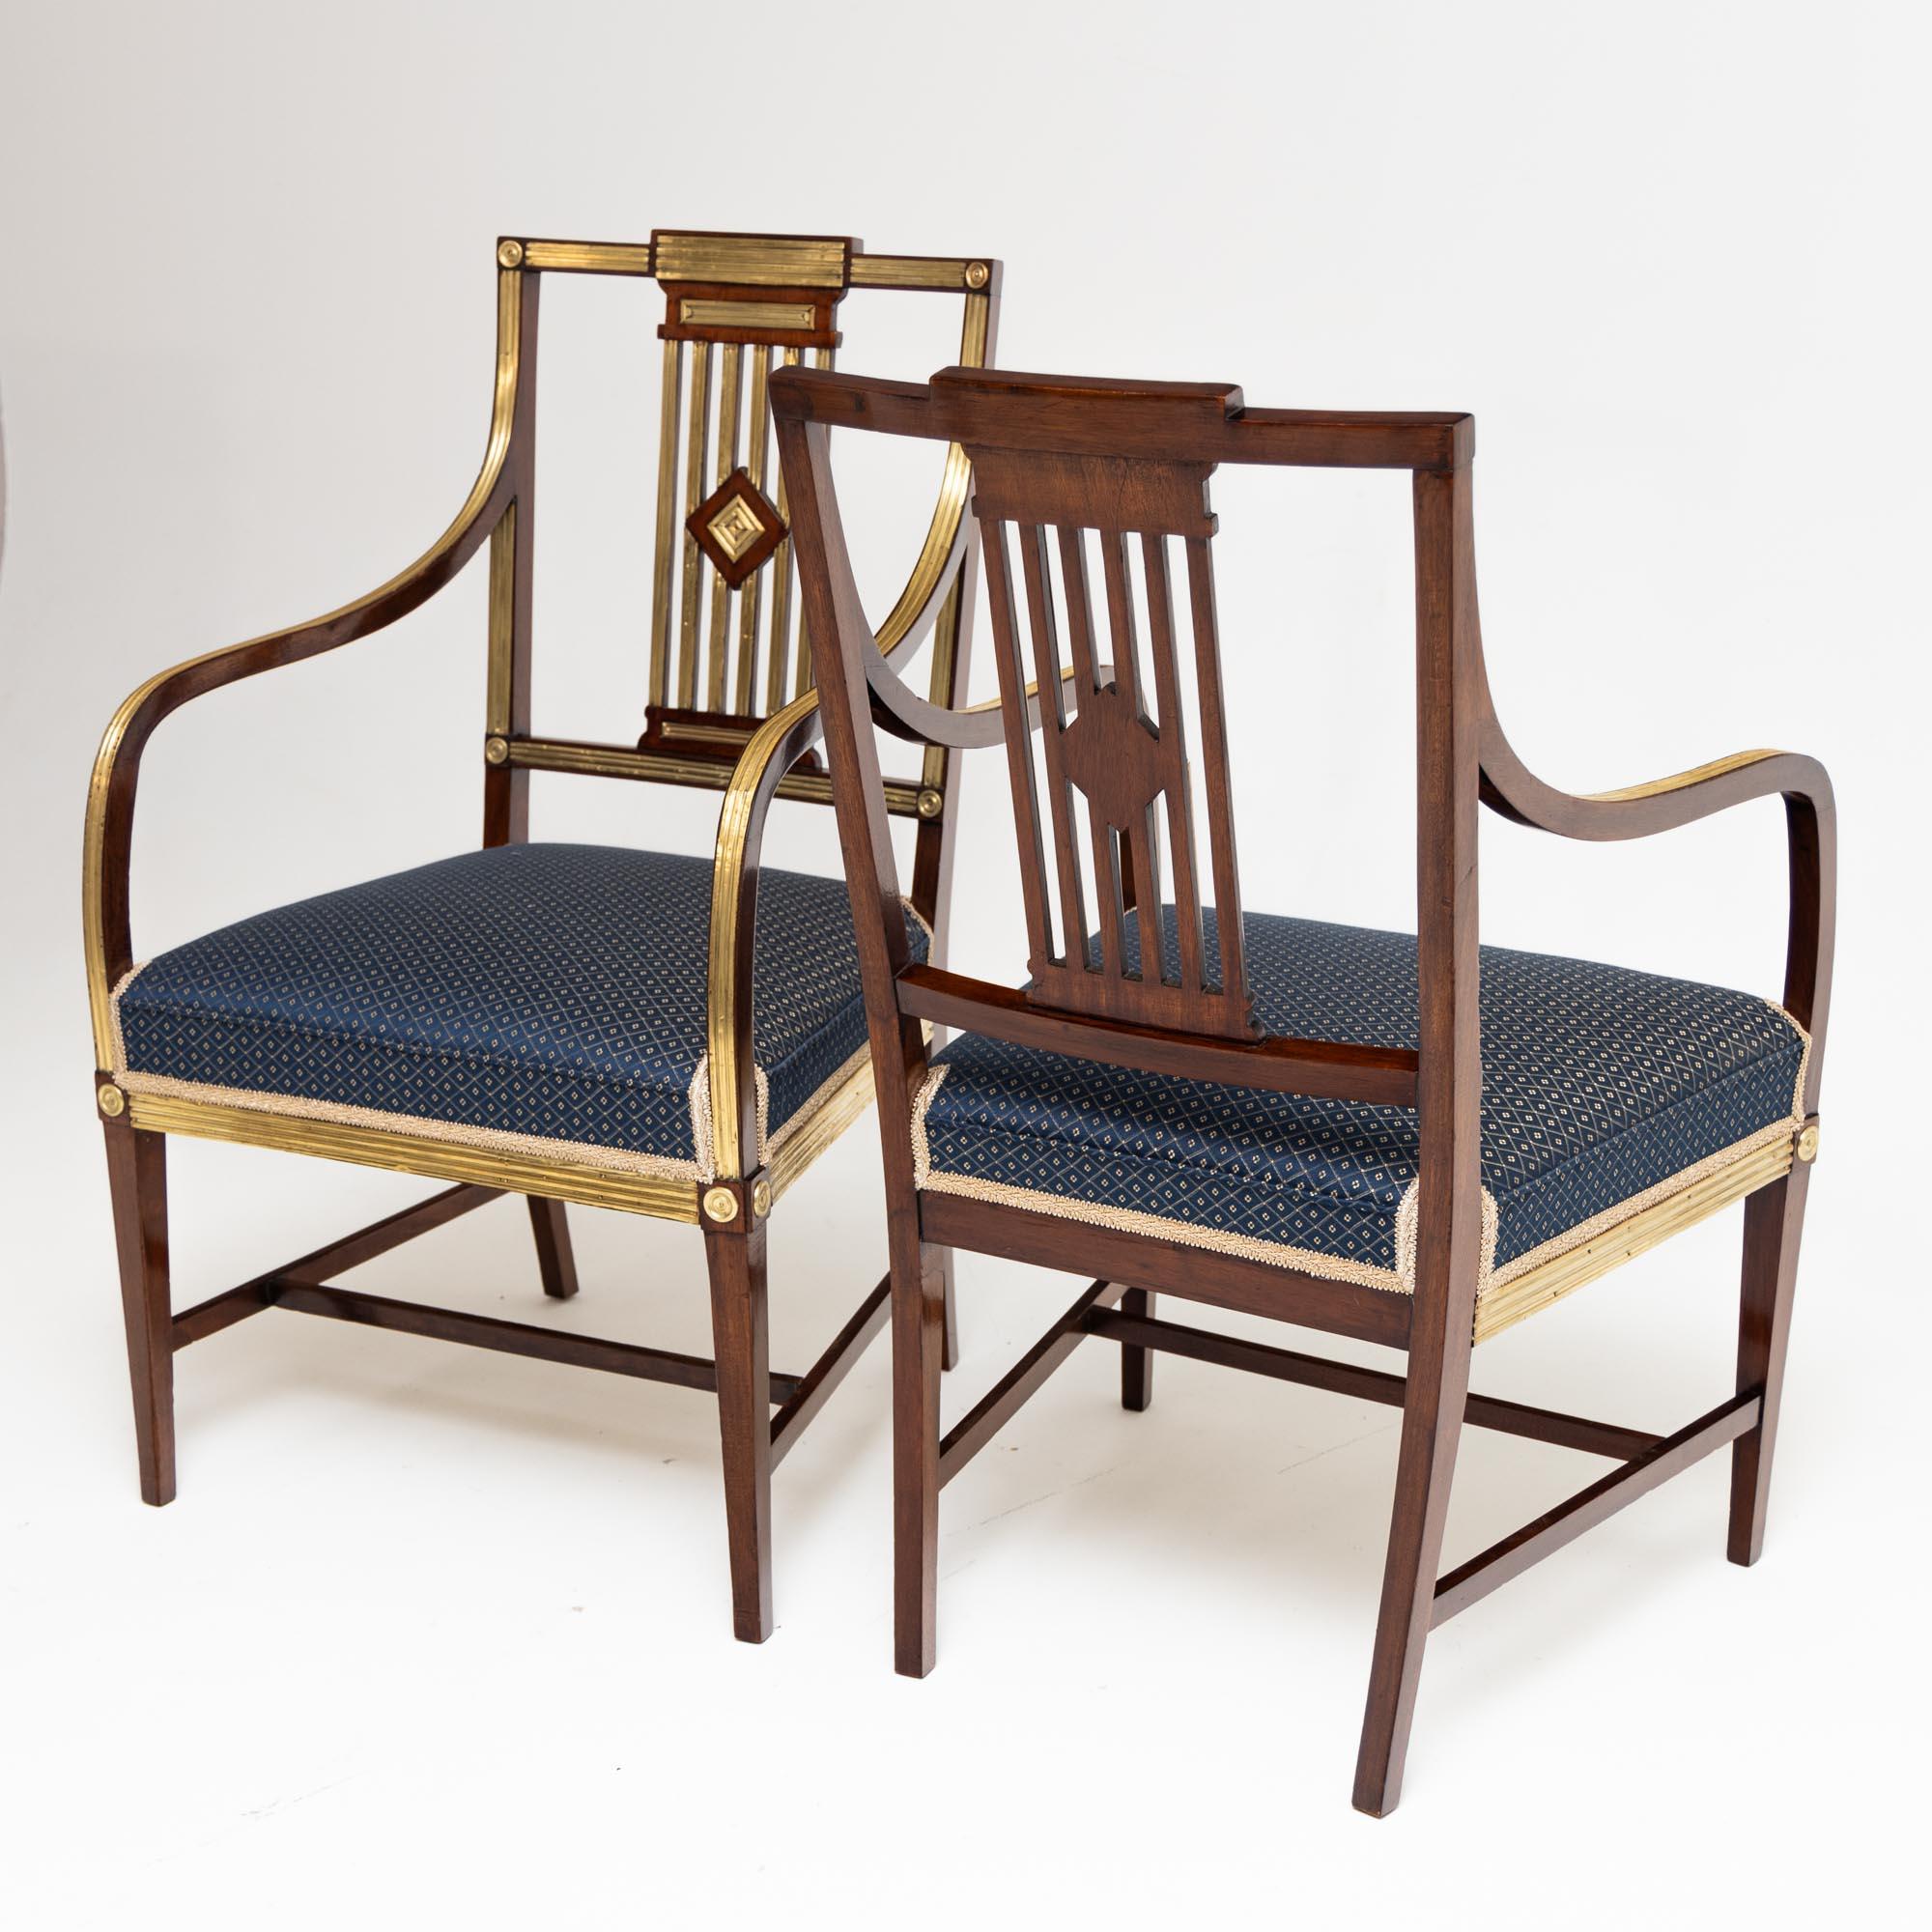 Pair of Neoclassical Dining Room Chairs, Brass, Baltic States, Late 18th Century For Sale 3